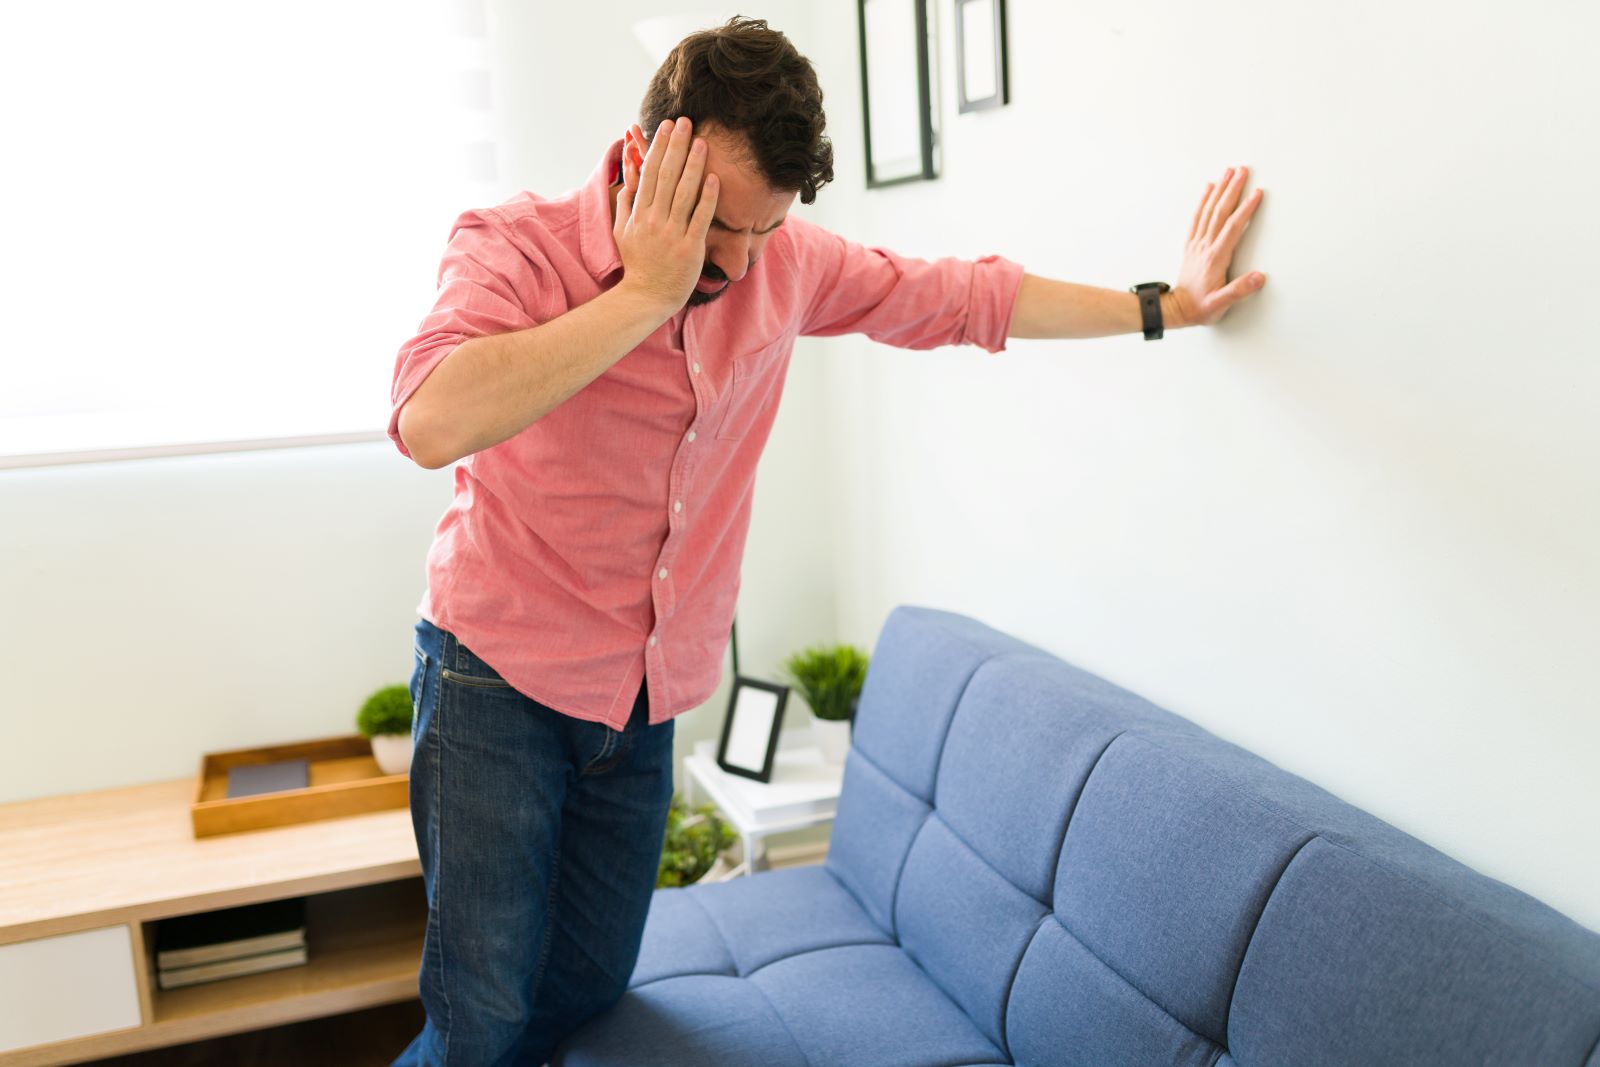 A person gets dizzy and leans against the wall.